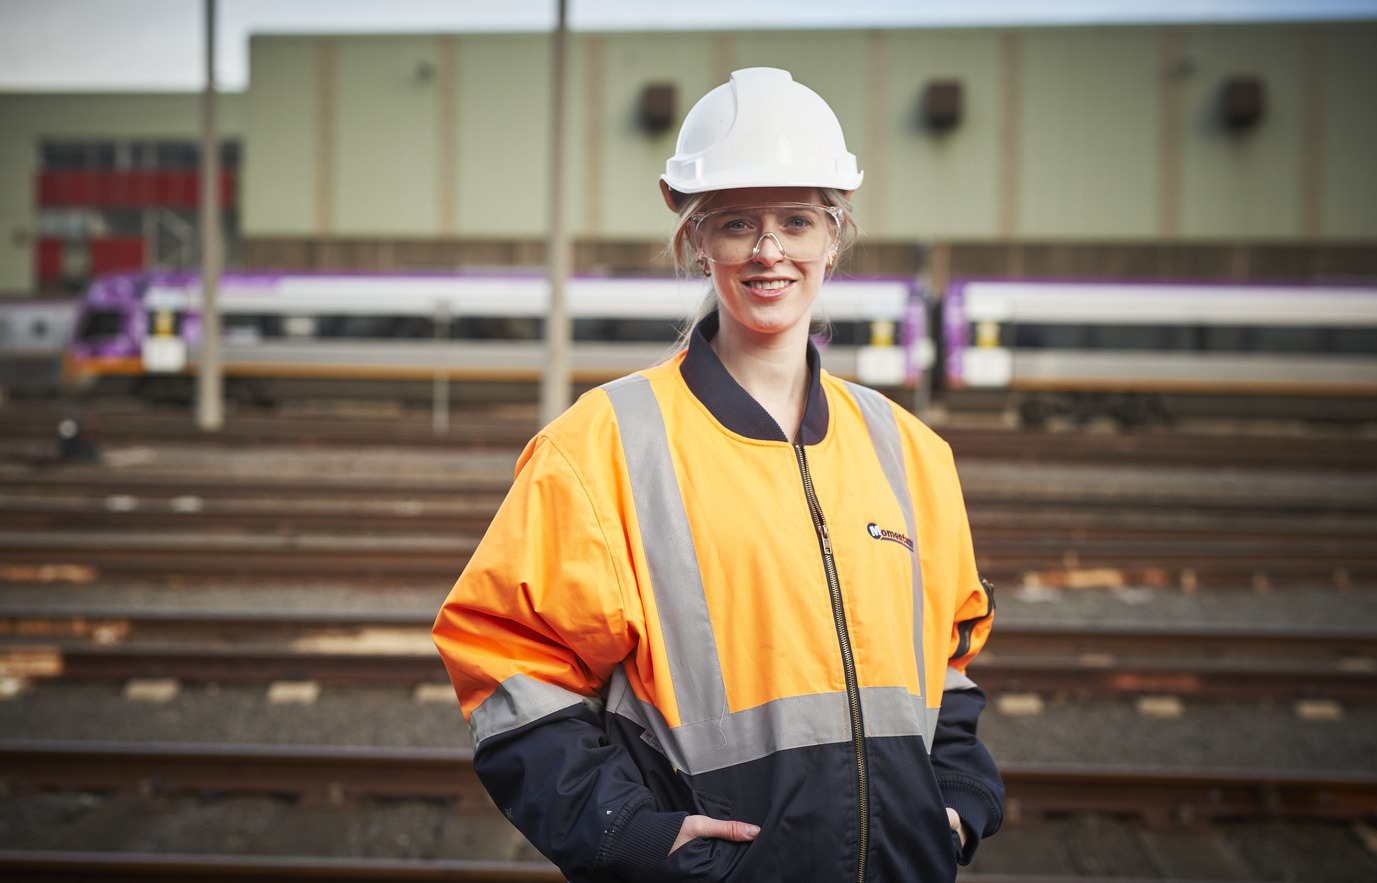 A rail worker standing in front of a train on the tracks, representing the Rail Career Path Program